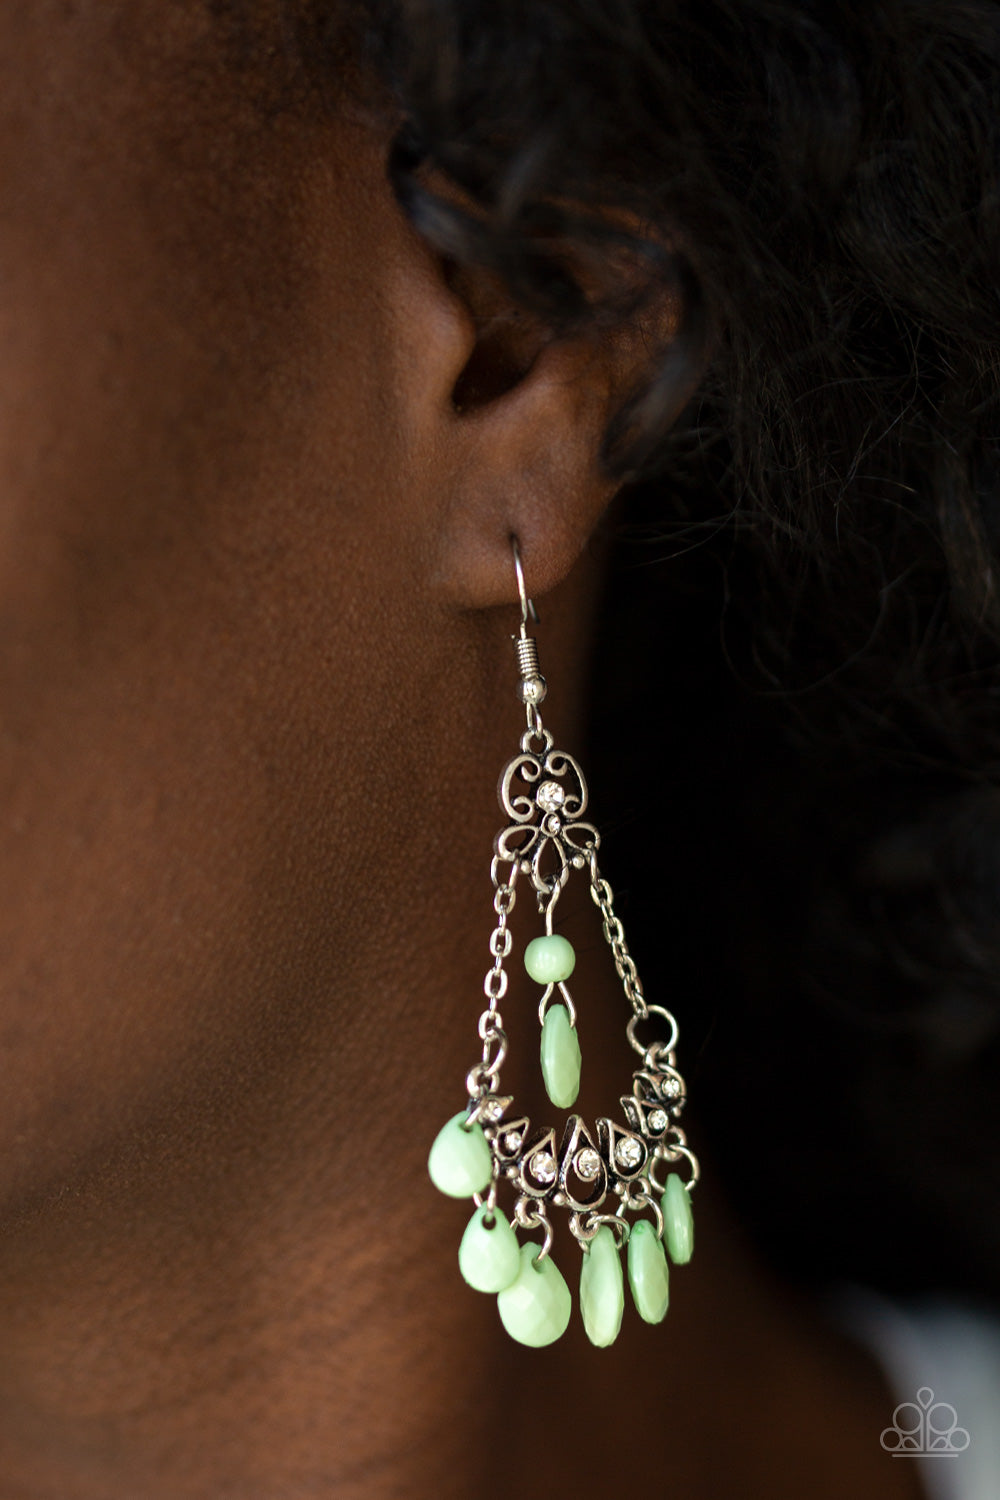 Paparazzi Malibu Sunset - Green - Faceted Teardrop beads - Silver Chains - Earrings - $5 Jewelry with Ashley Swint